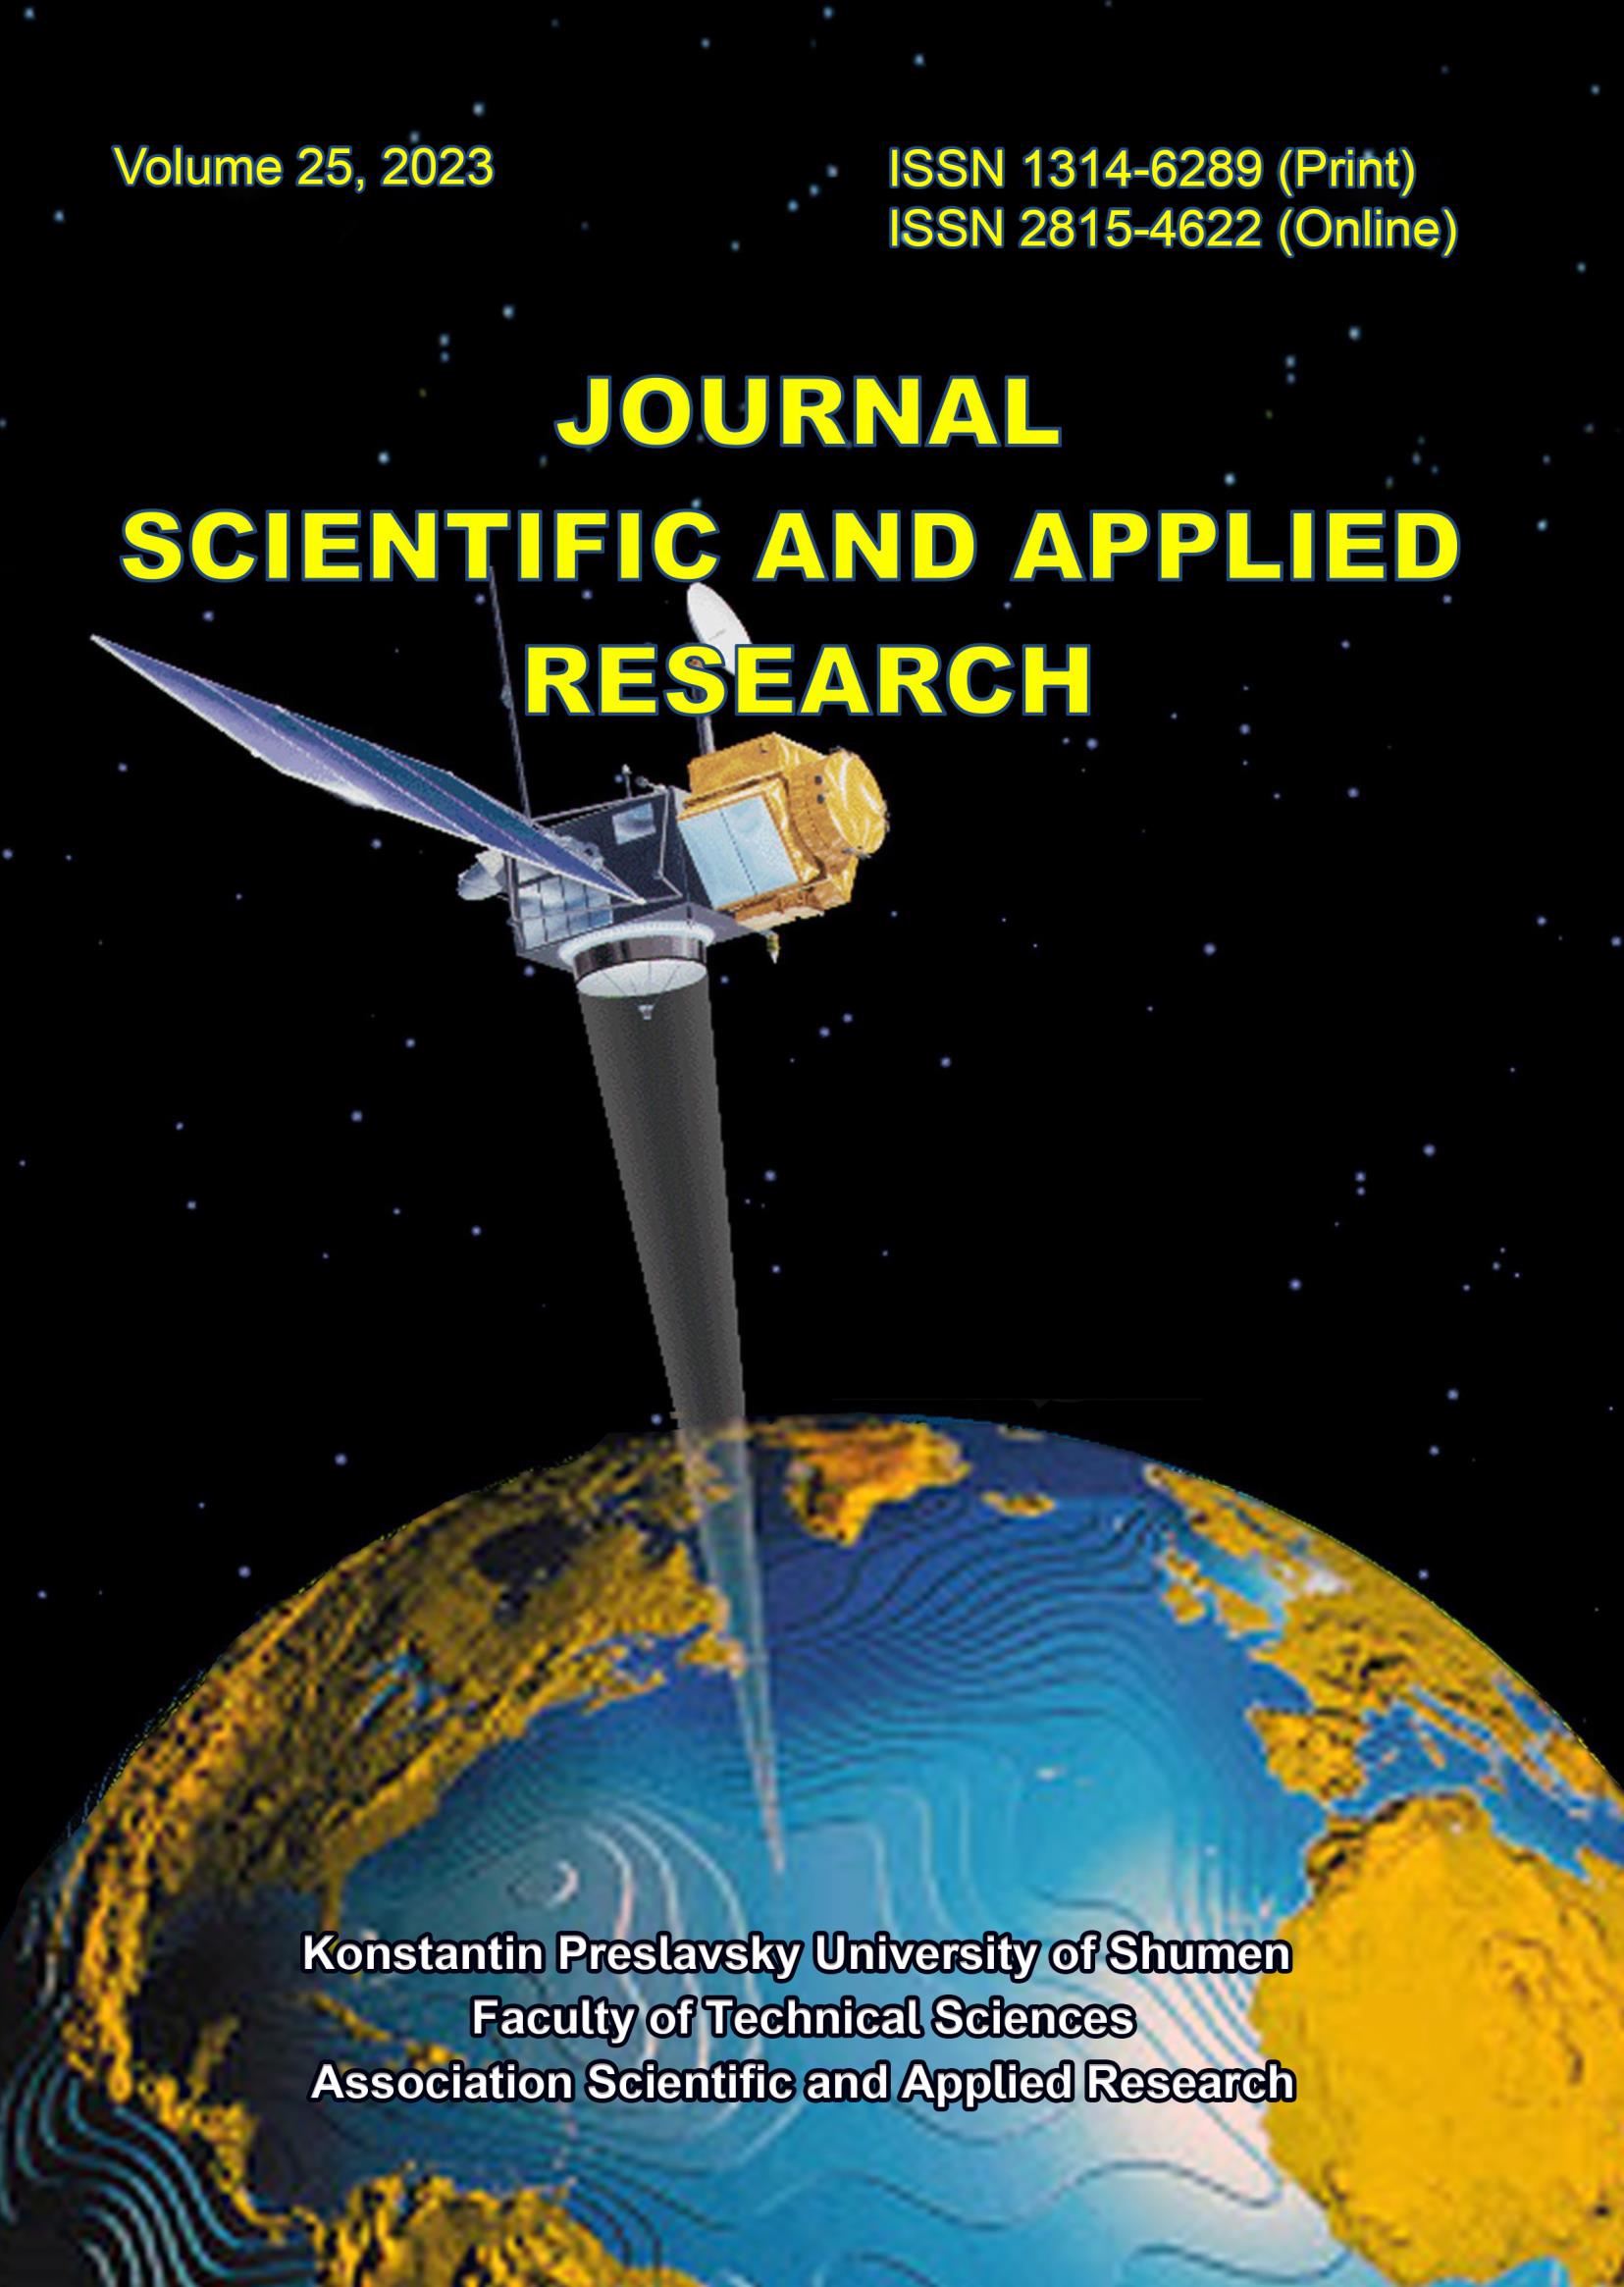 					View Vol. 25 No. 1 (2023): Journal Scientific and Applied Research
				